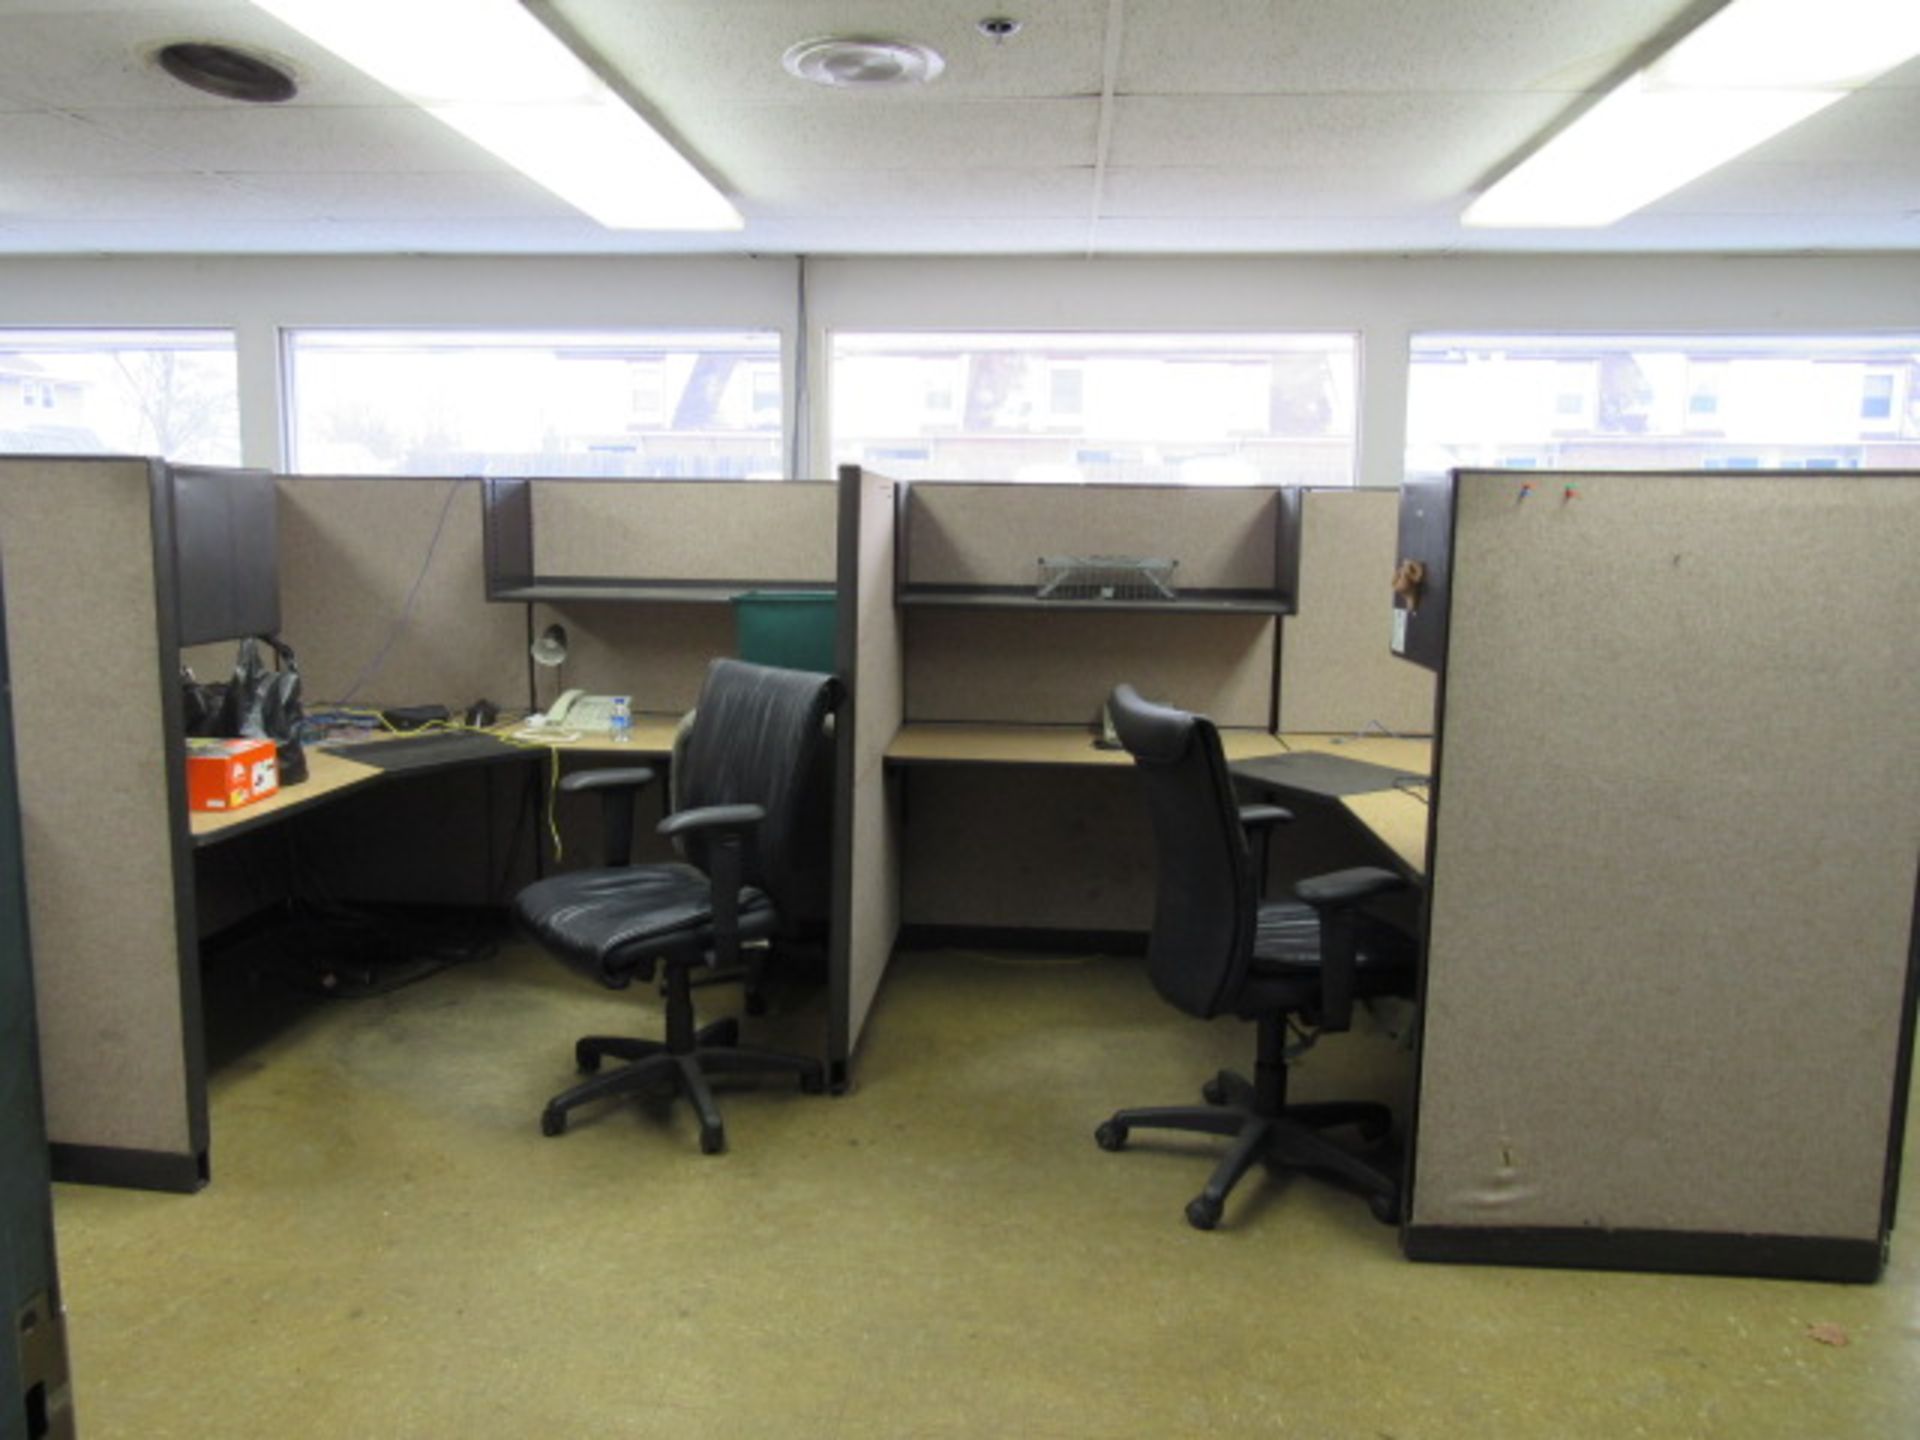 Contents of All the Offices (see photos) - Image 6 of 6